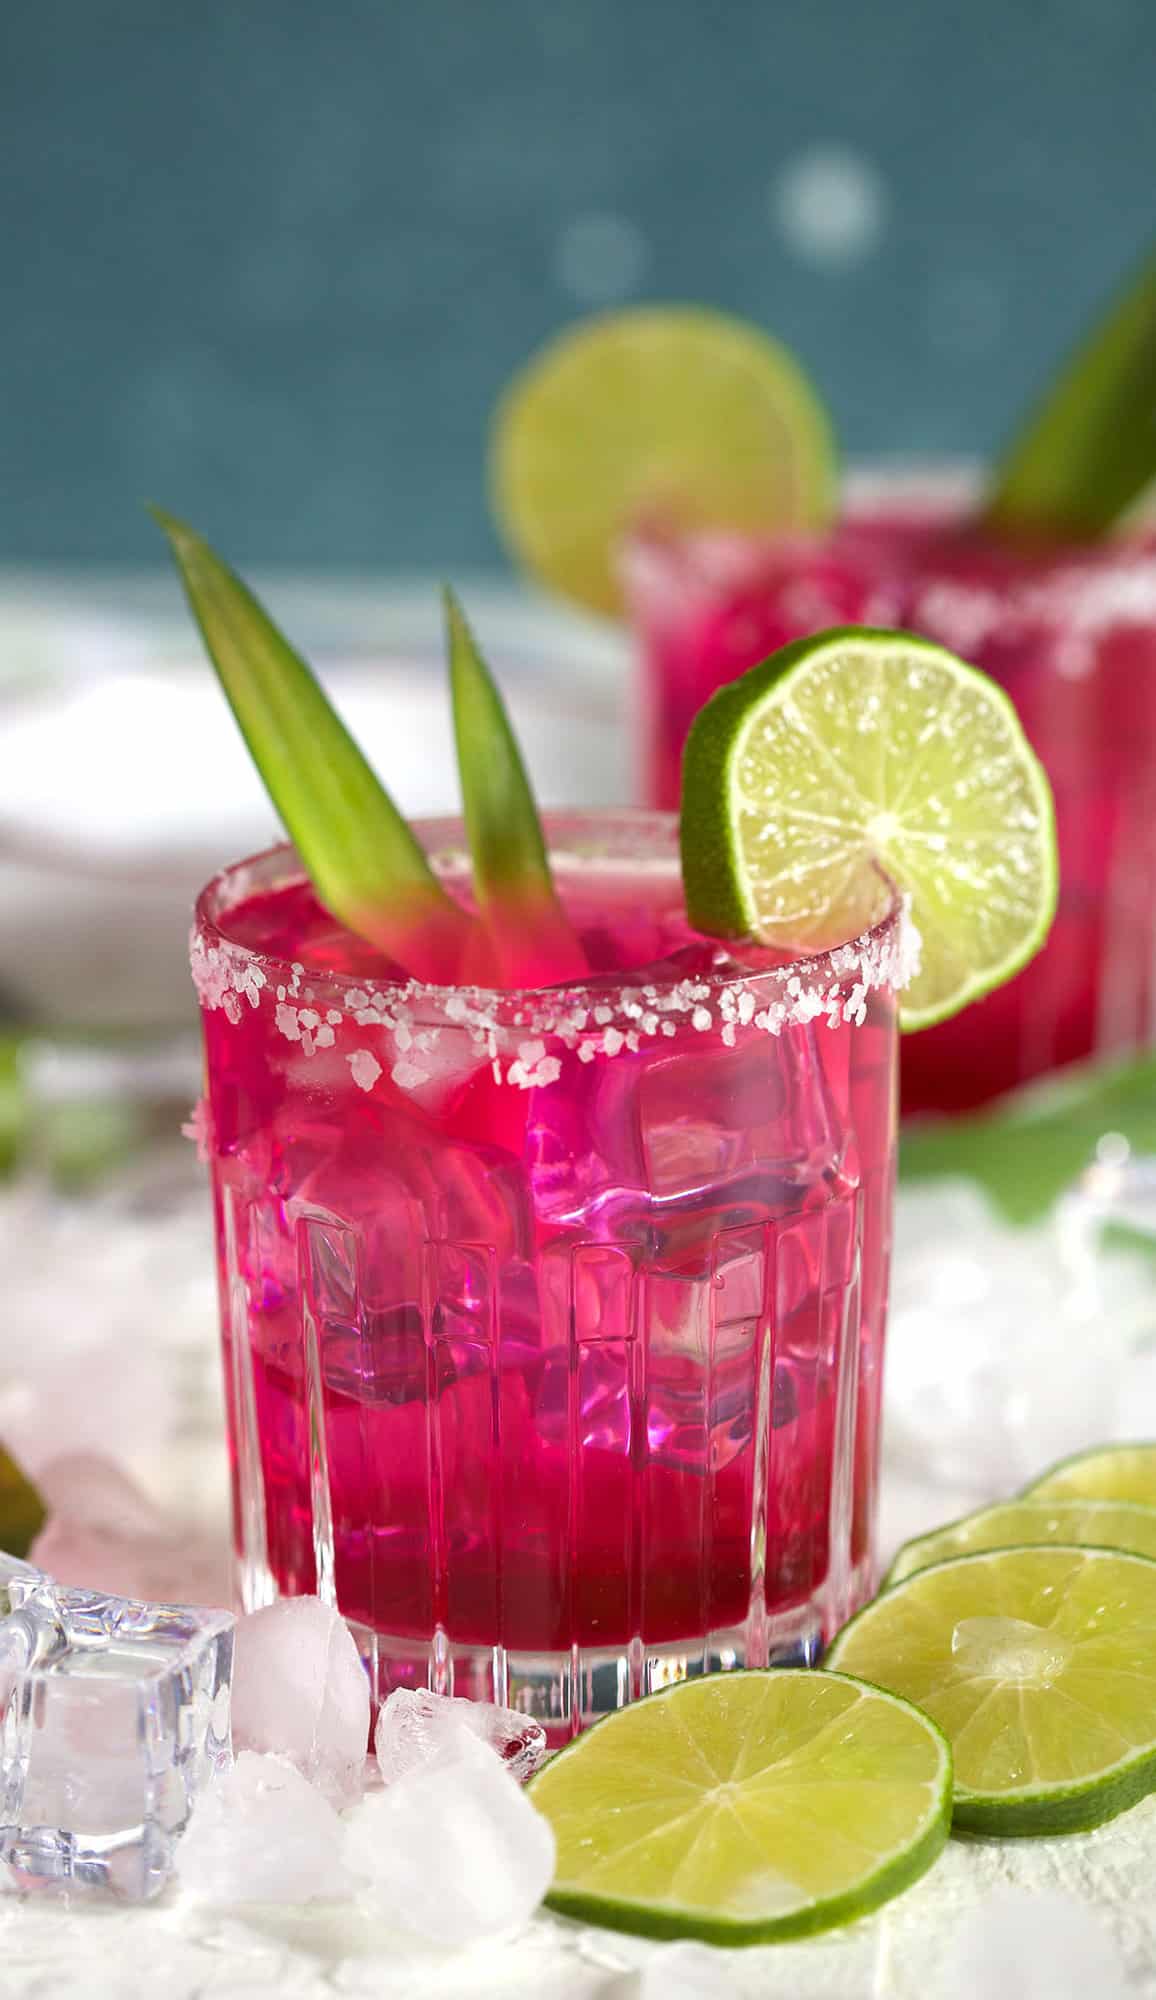 A glass filled with margarita is ready to be enjoyed on a white surface.